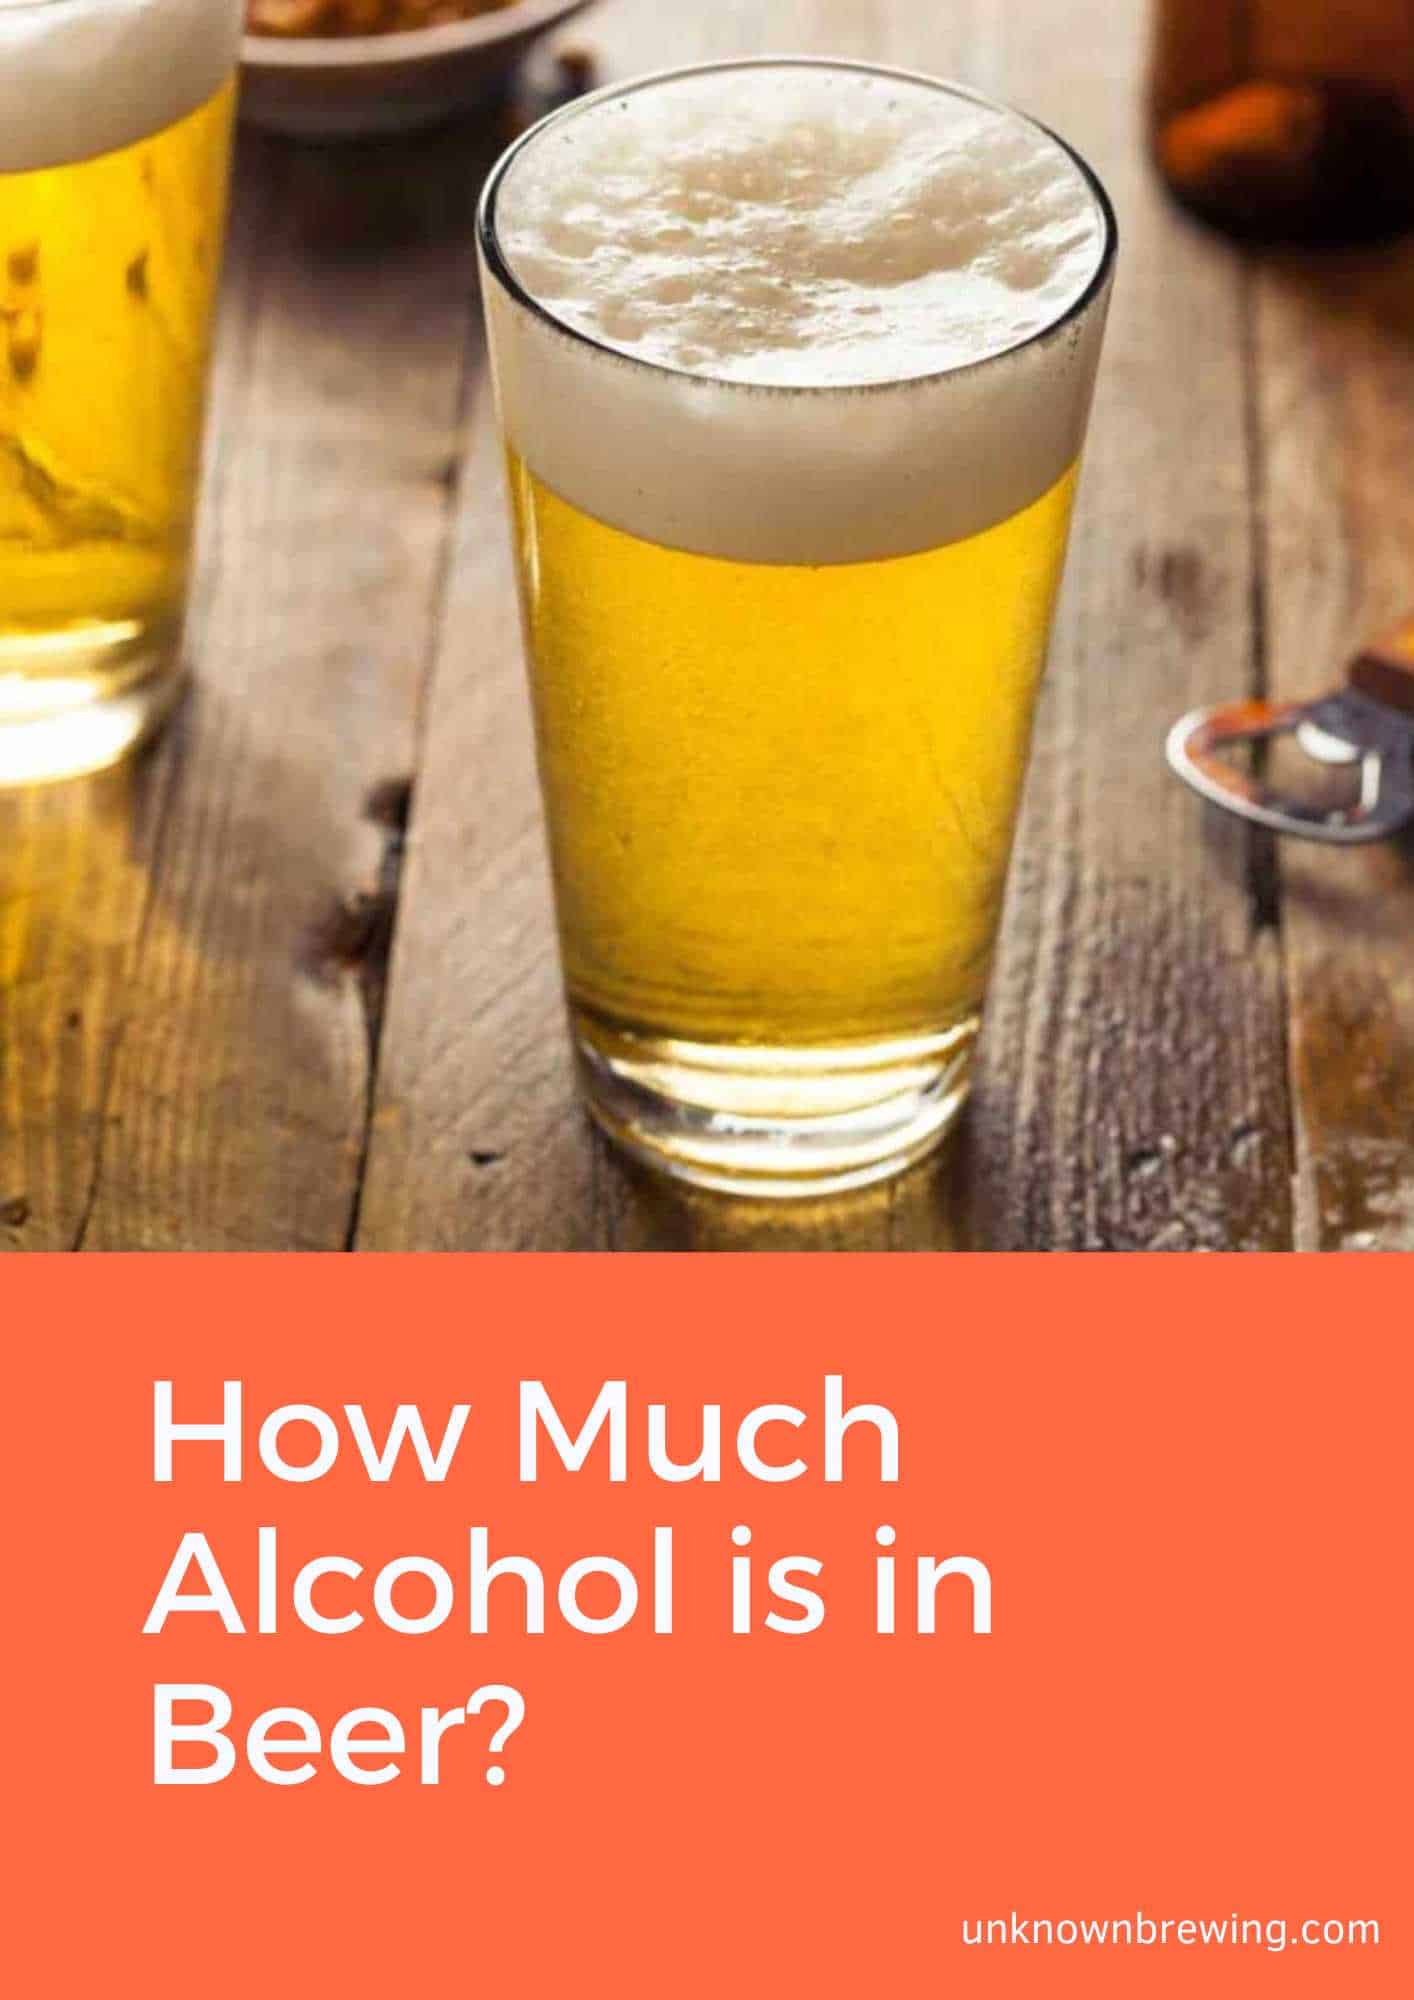 How Much Alcohol is in Beer